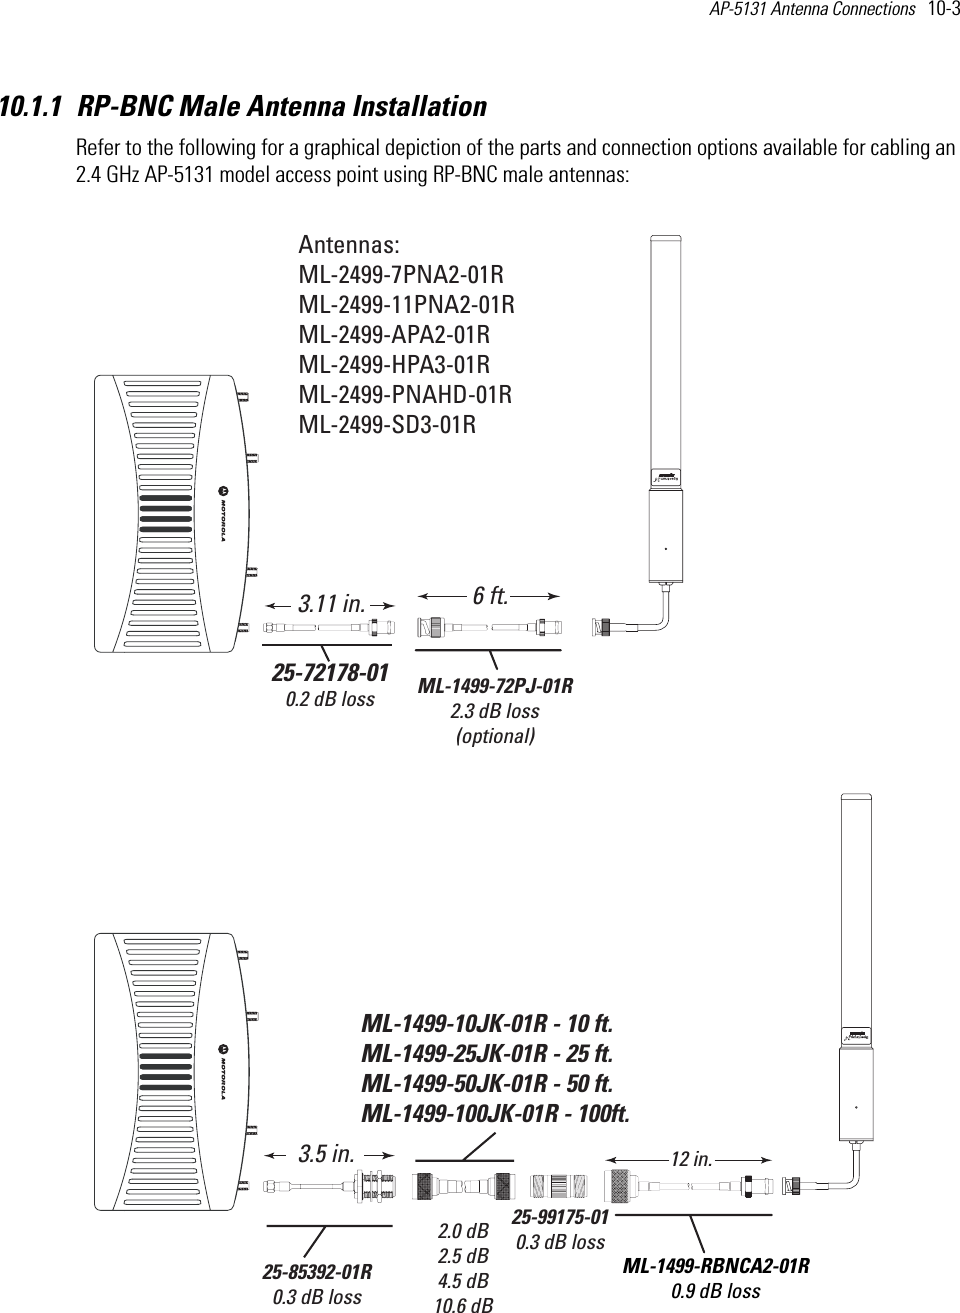 AP-5131 Antenna Connections   10-3 10.1.1 RP-BNC Male Antenna InstallationRefer to the following for a graphical depiction of the parts and connection options available for cabling an 2.4 GHz AP-5131 model access point using RP-BNC male antennas: Antennas:ML-2499-7PNA2-01RML-2499-11PNA2-01RML-2499-APA2-01RML-2499-HPA3-01RML-2499-PNAHD-01RML-2499-SD3-01R25-72178-010.2 dB loss3.11 in. 6 ft.ML-1499-72PJ-01R2.3 dB loss(optional)25-85392-01R0.3 dB loss3.5 in.ML-1499-10JK-01R - 10 ft.ML-1499-25JK-01R - 25 ft.ML-1499-50JK-01R - 50 ft.ML-1499-100JK-01R - 100ft. 2.0 dB2.5 dB4.5 dB10.6 dB25-99175-010.3 dB loss12 in.ML-1499-RBNCA2-01R0.9 dB loss